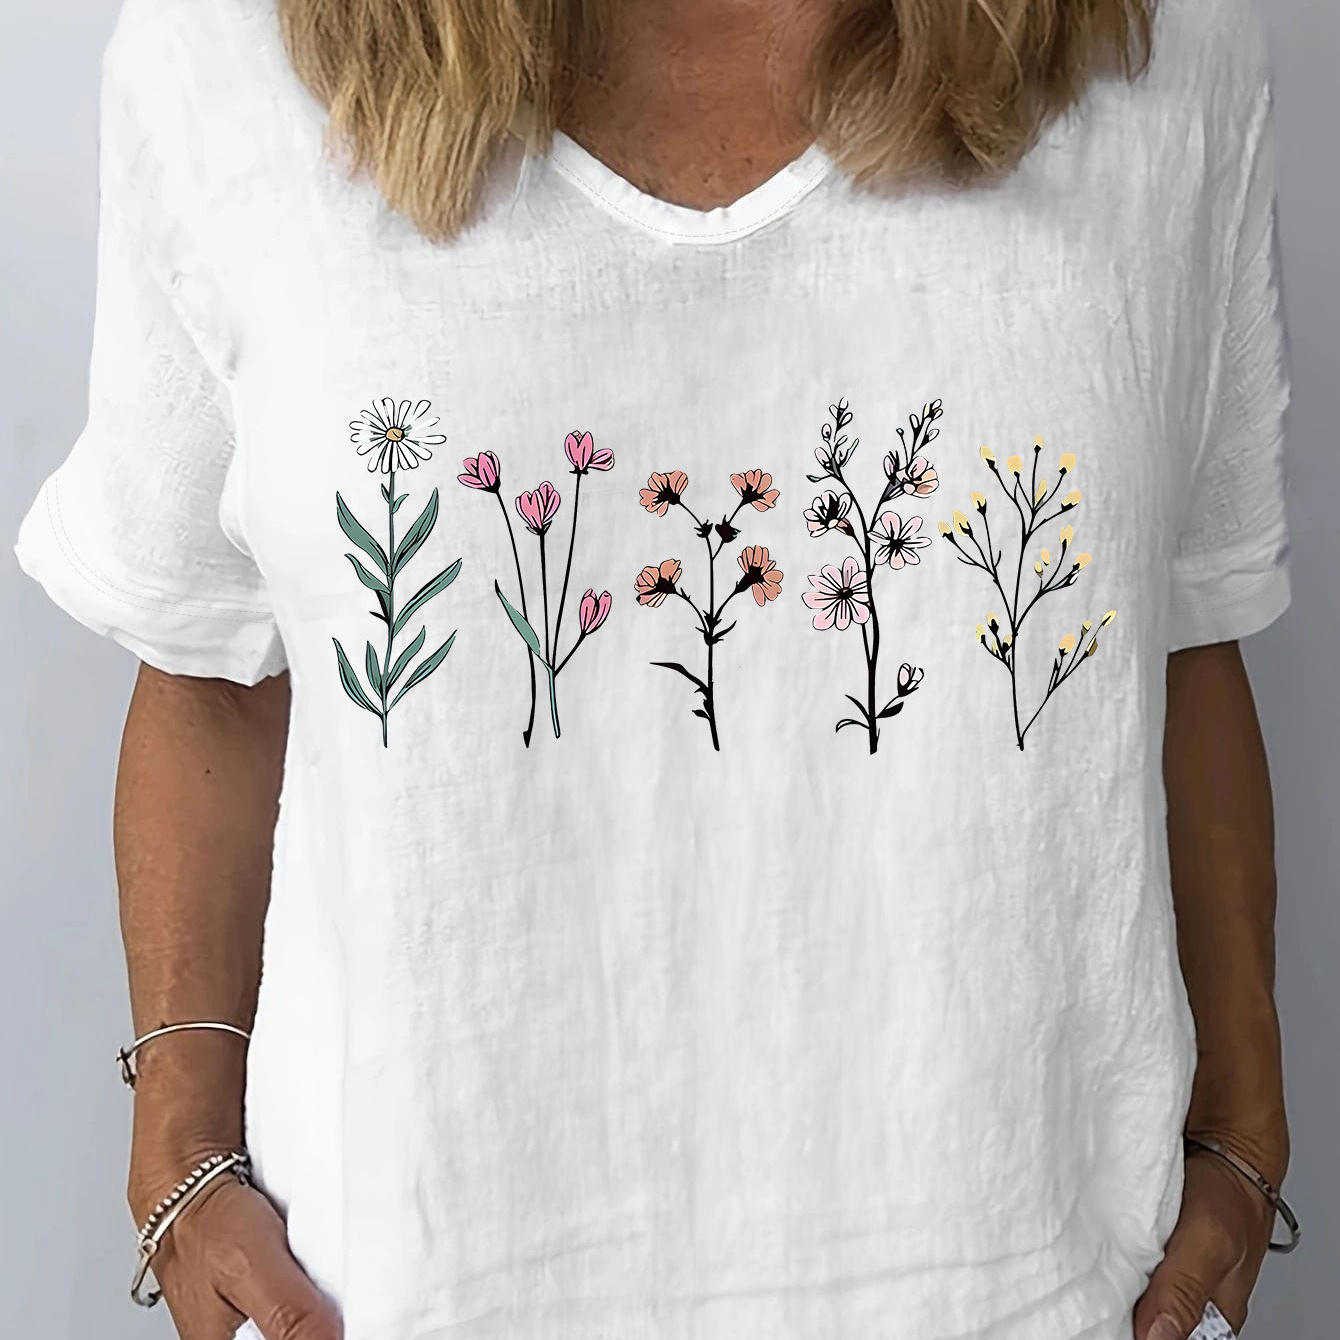 

Floral Print T-shirt, Short Sleeve V Neck Casual Top For Summer & Spring, Women's Clothing